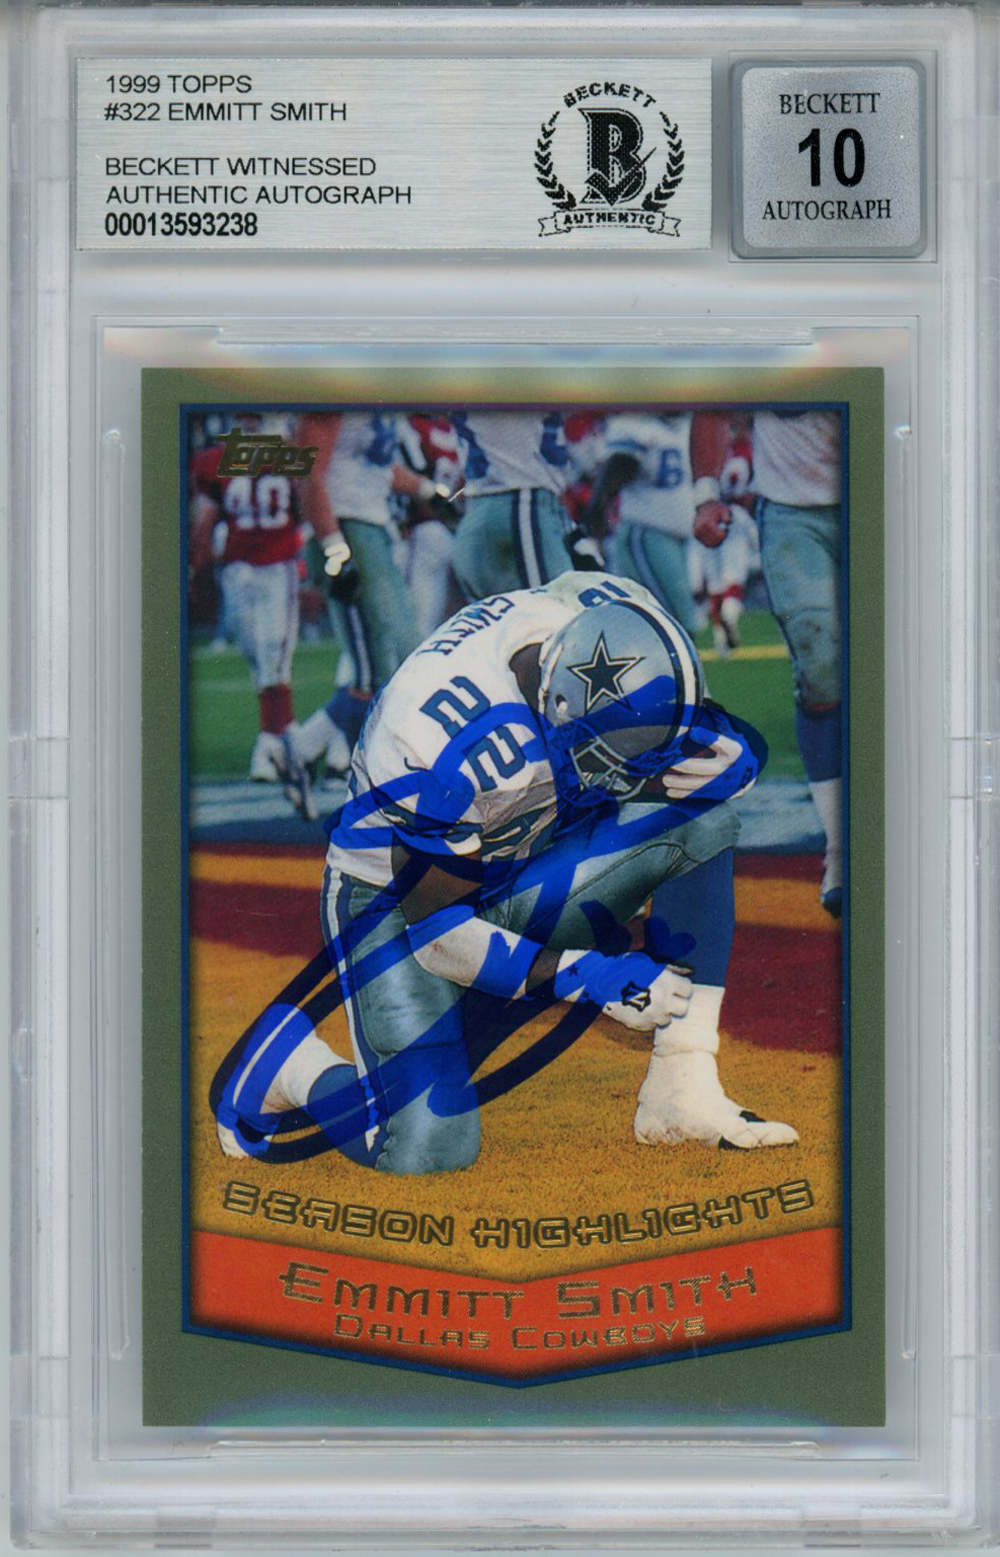 Emmitt Smith Autographed 1999 Topps #322 Trading Card Beckett 10 Slab